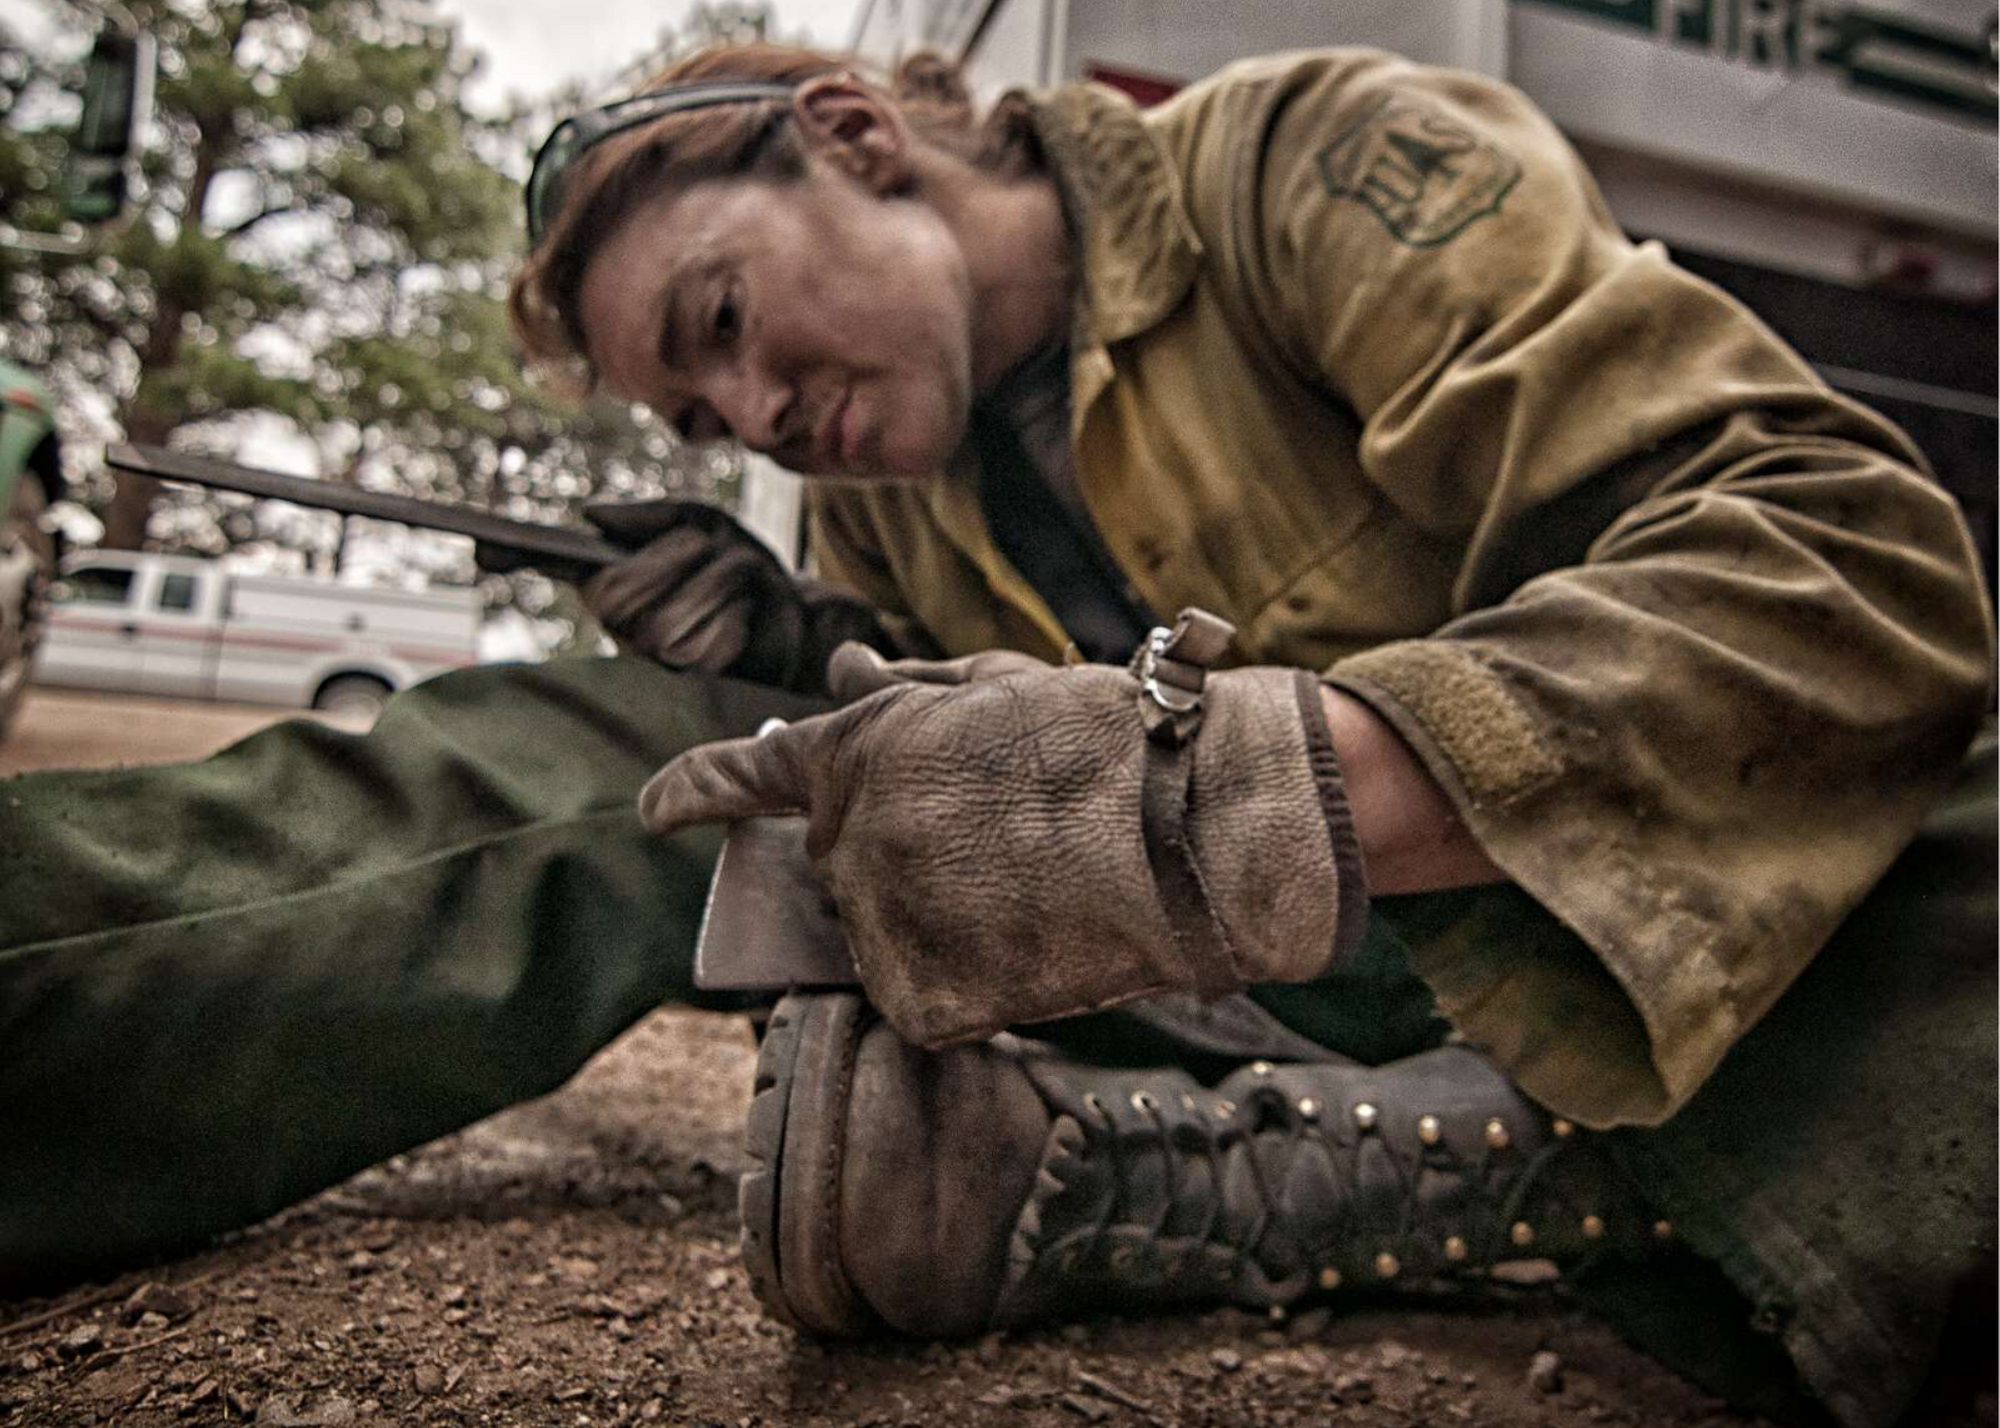 Carrie Bowers working as a wildland firefighter at Klamath National Forest